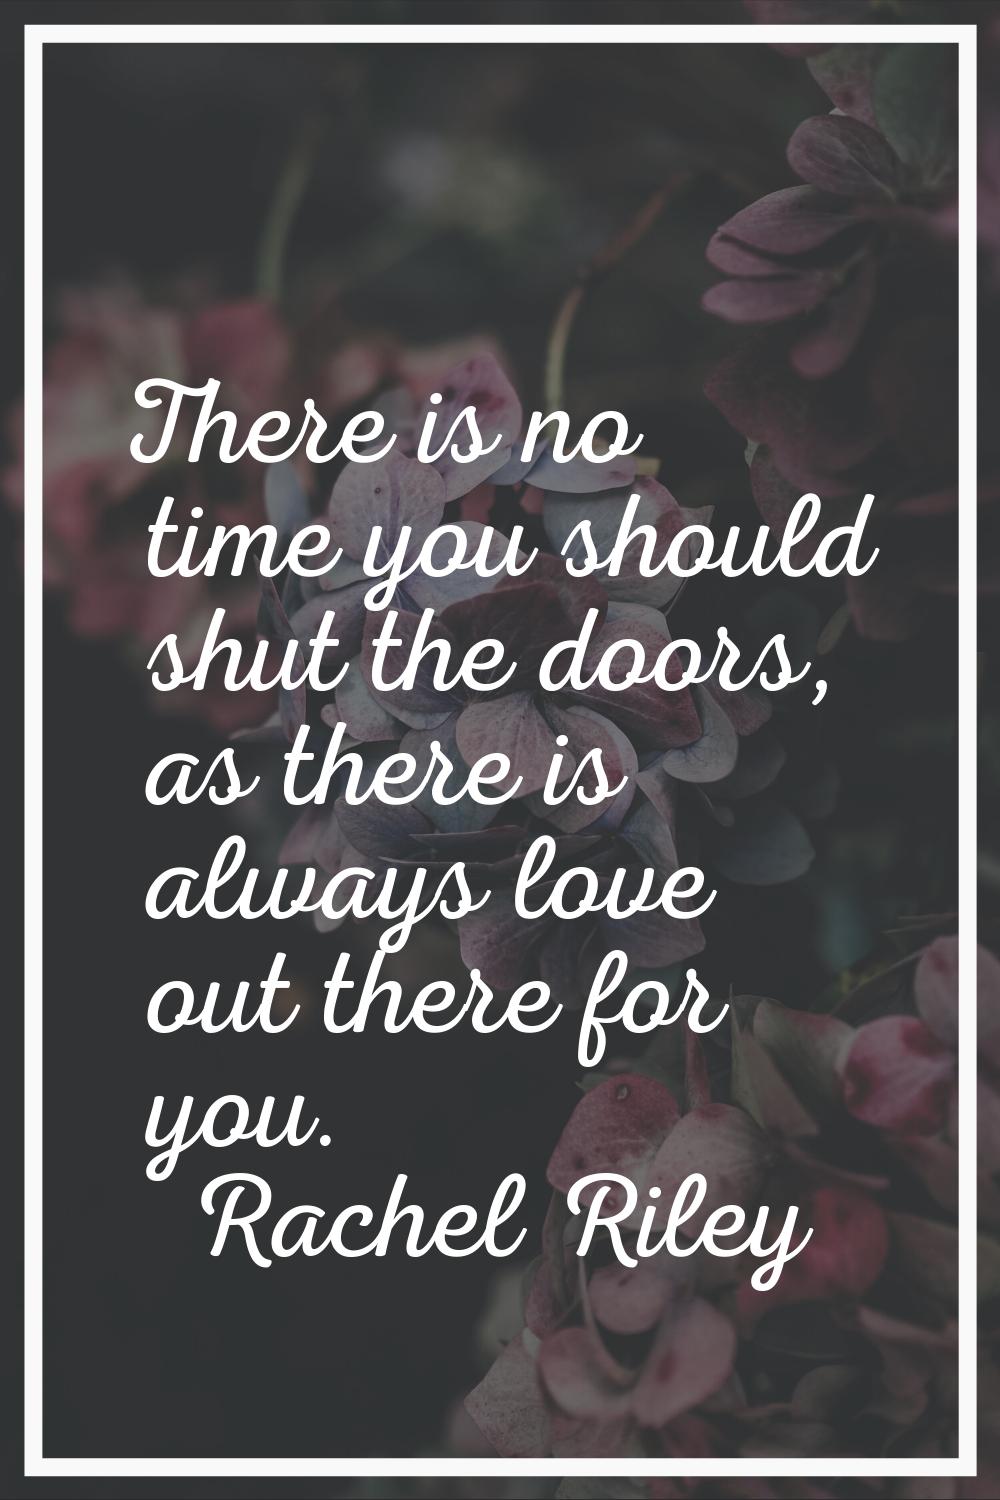 There is no time you should shut the doors, as there is always love out there for you.